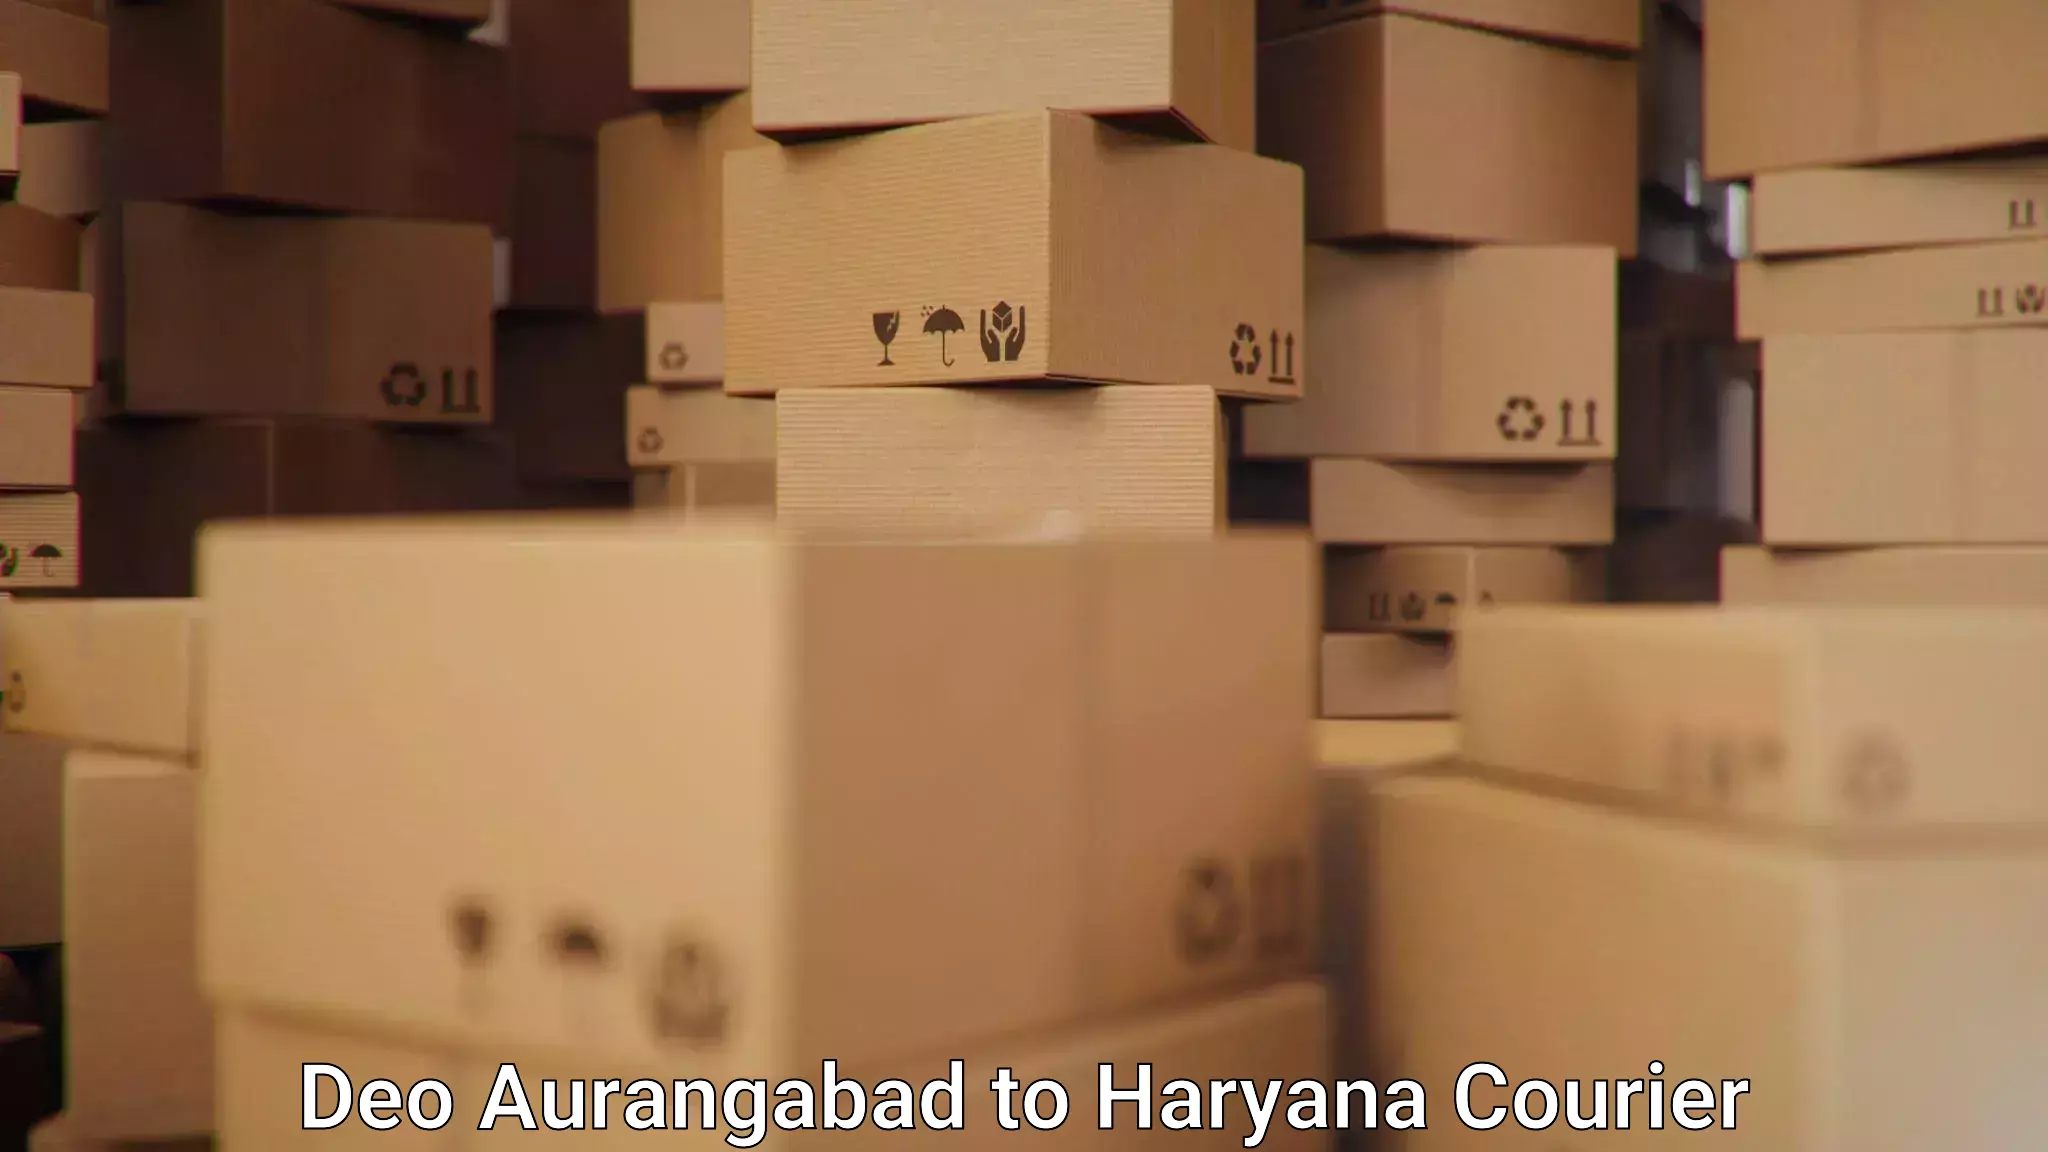 Professional courier services Deo Aurangabad to Ambala